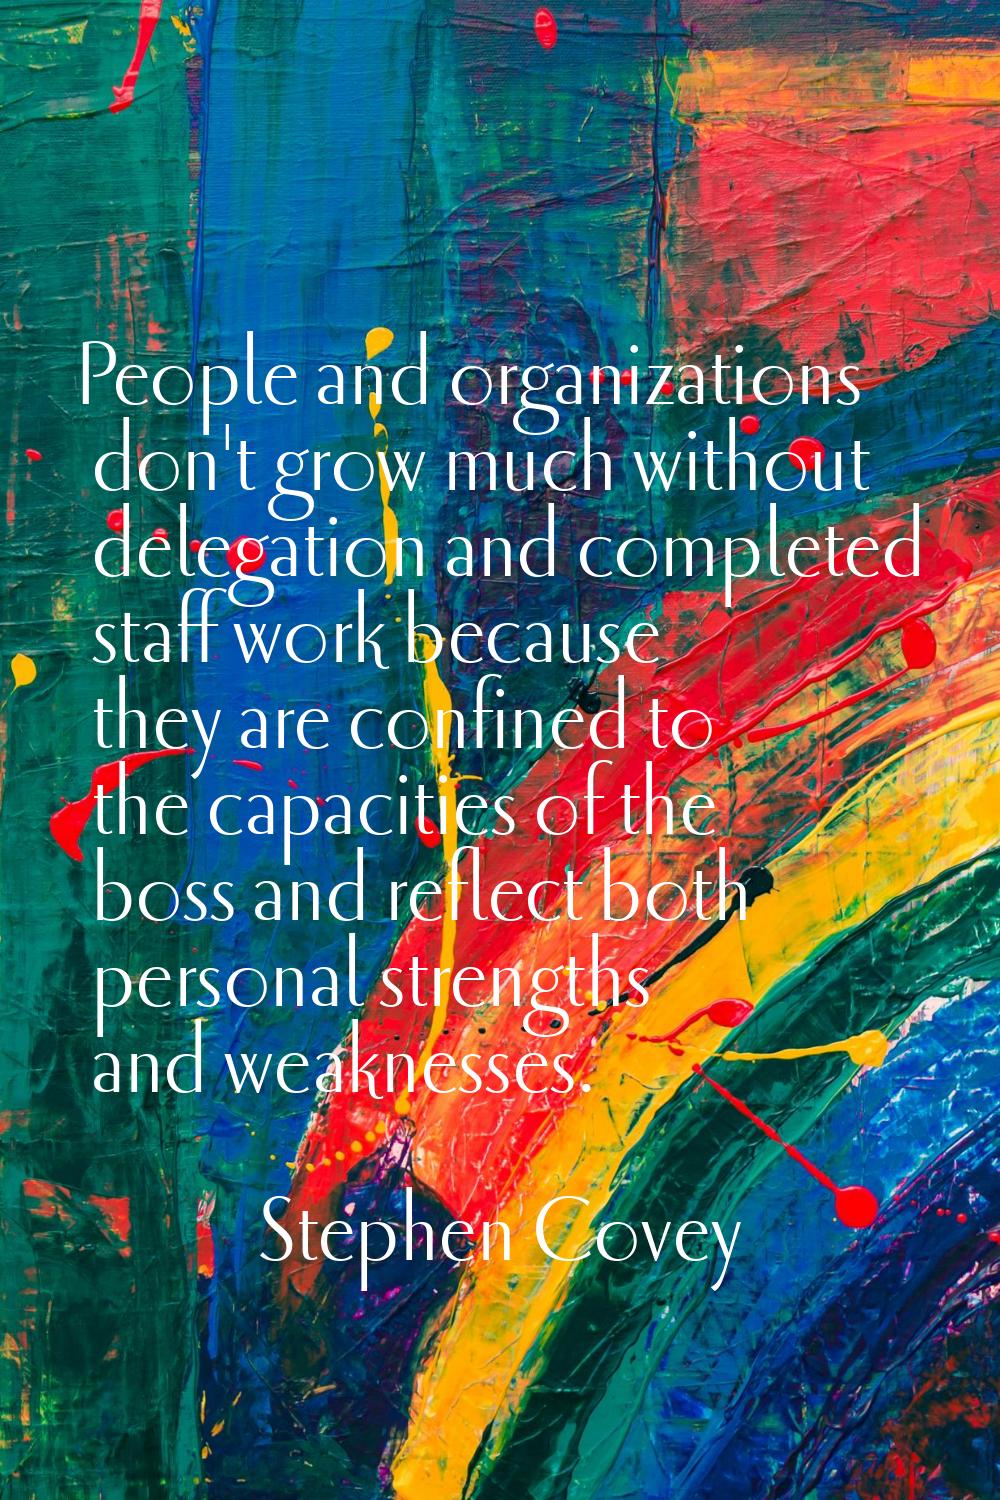 People and organizations don't grow much without delegation and completed staff work because they a